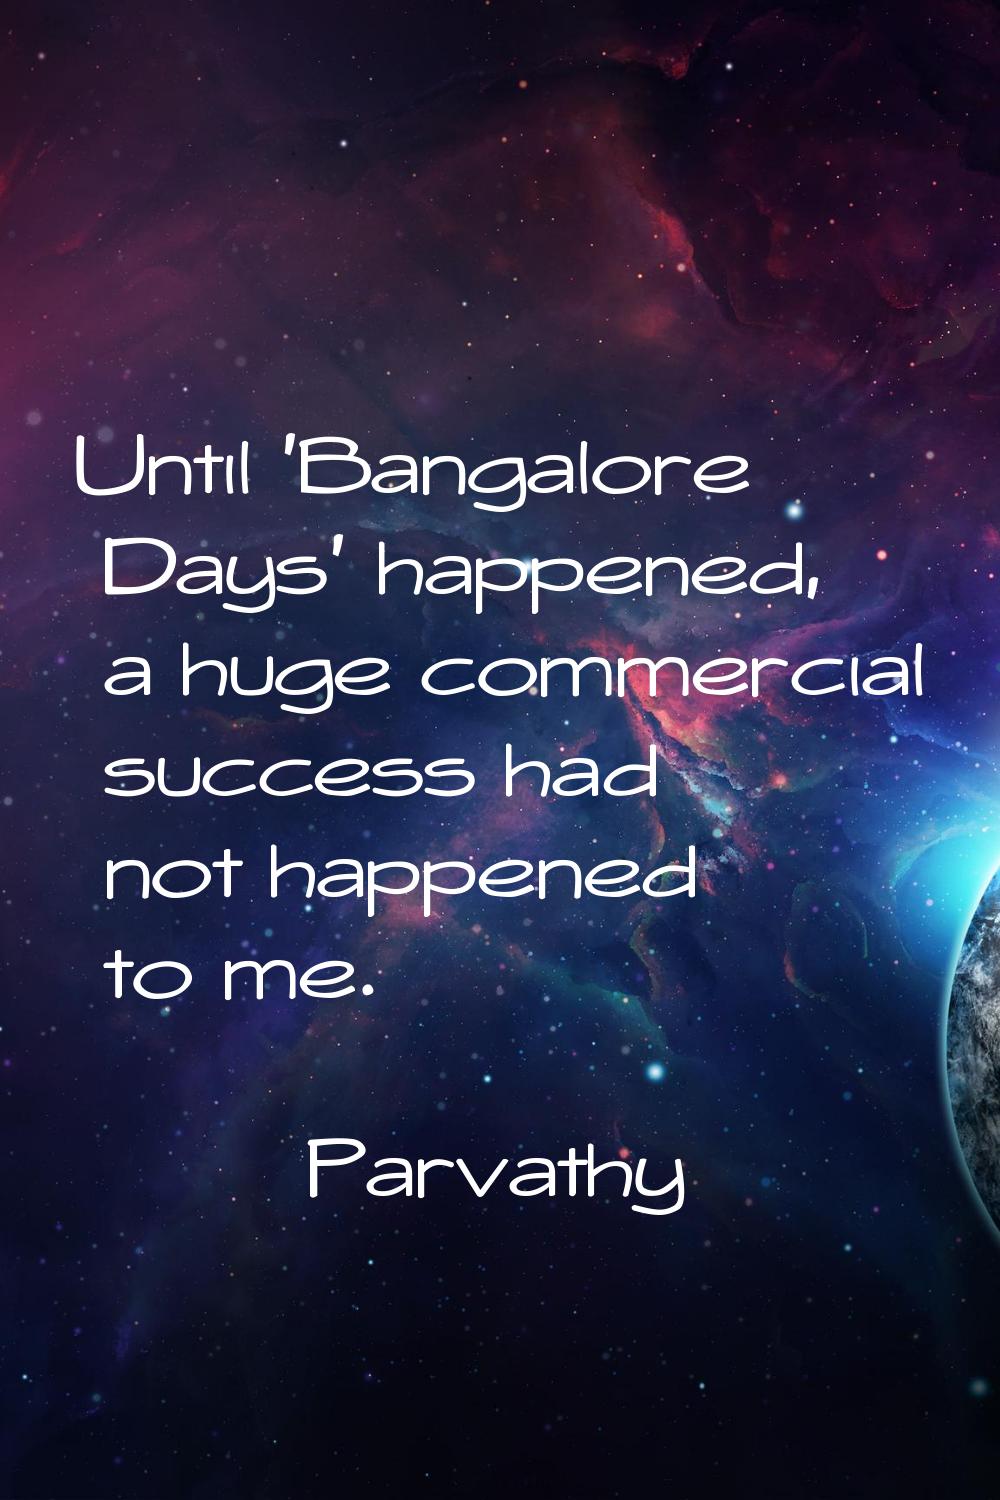 Until 'Bangalore Days' happened, a huge commercial success had not happened to me.